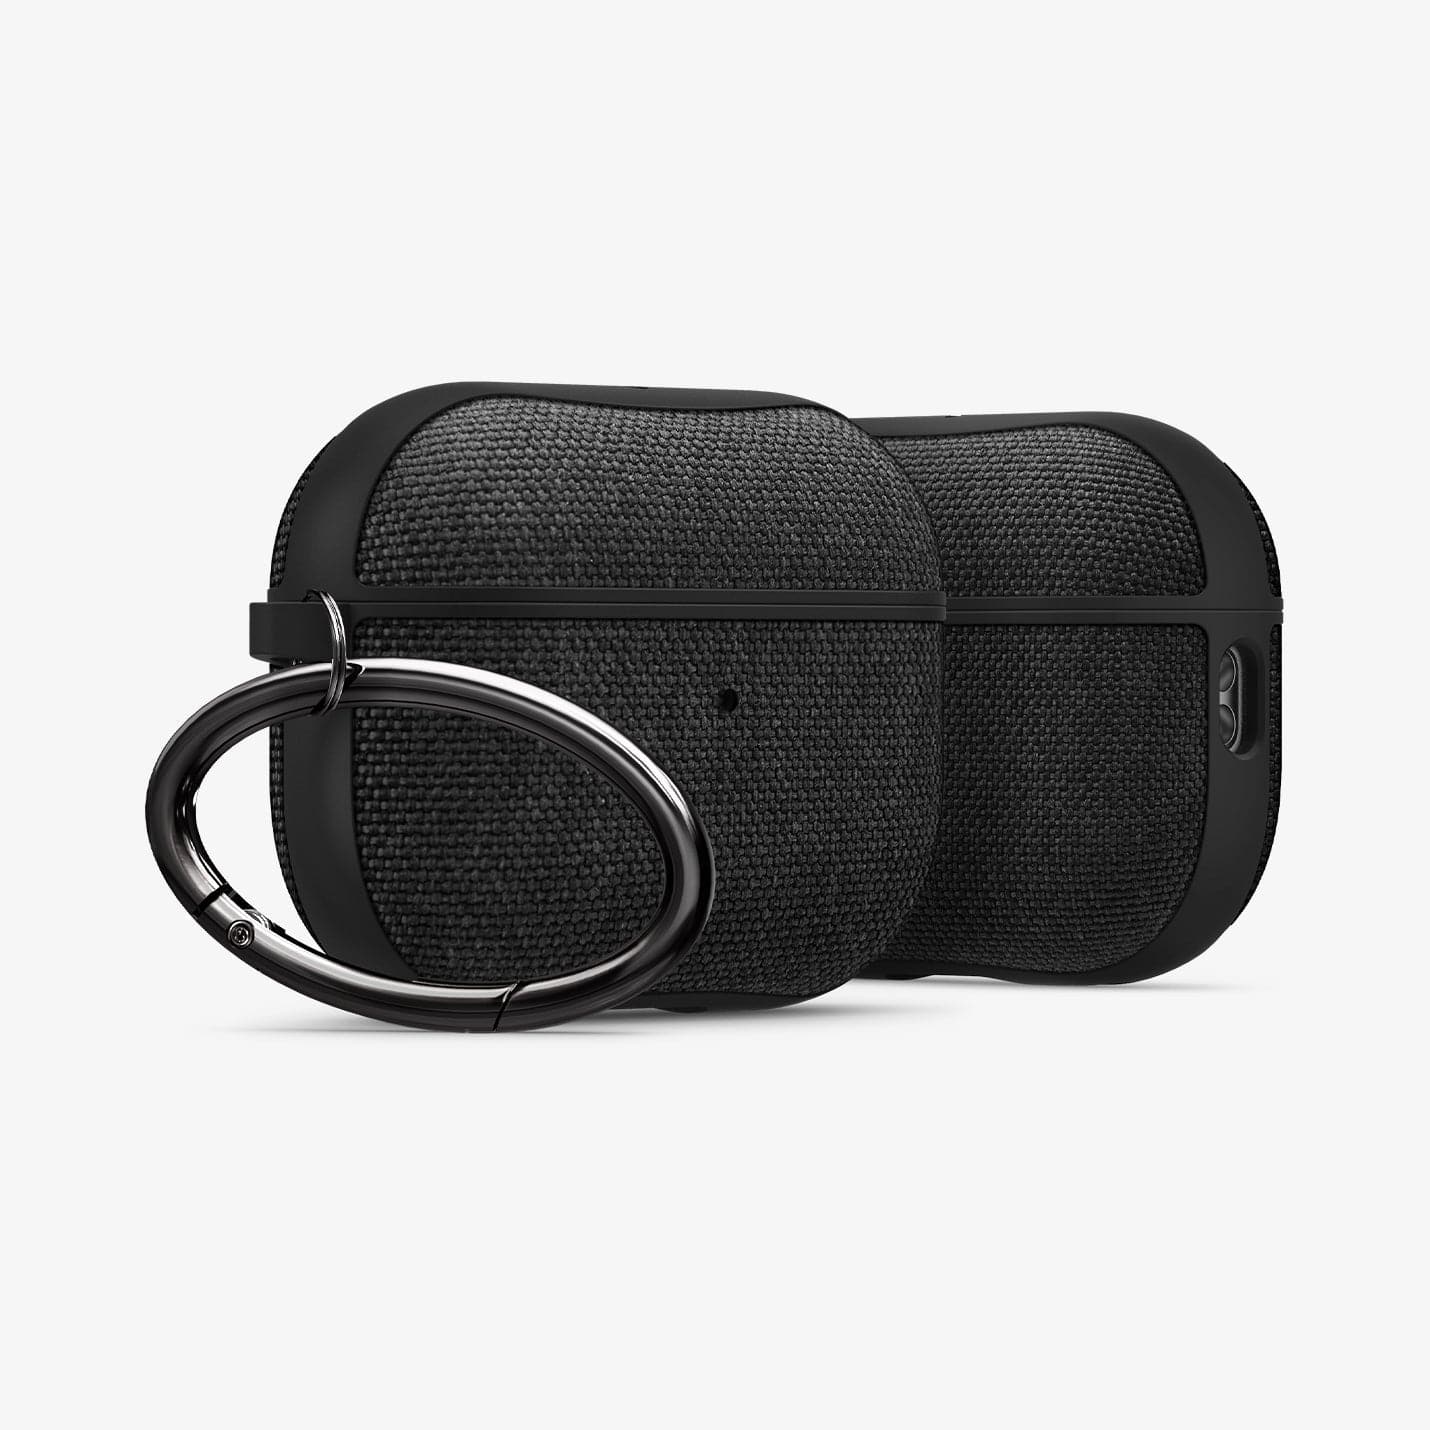 ACS05483 - Apple AirPods Pro 2 Case Urban Fit in black showing the front, sides and carabiner